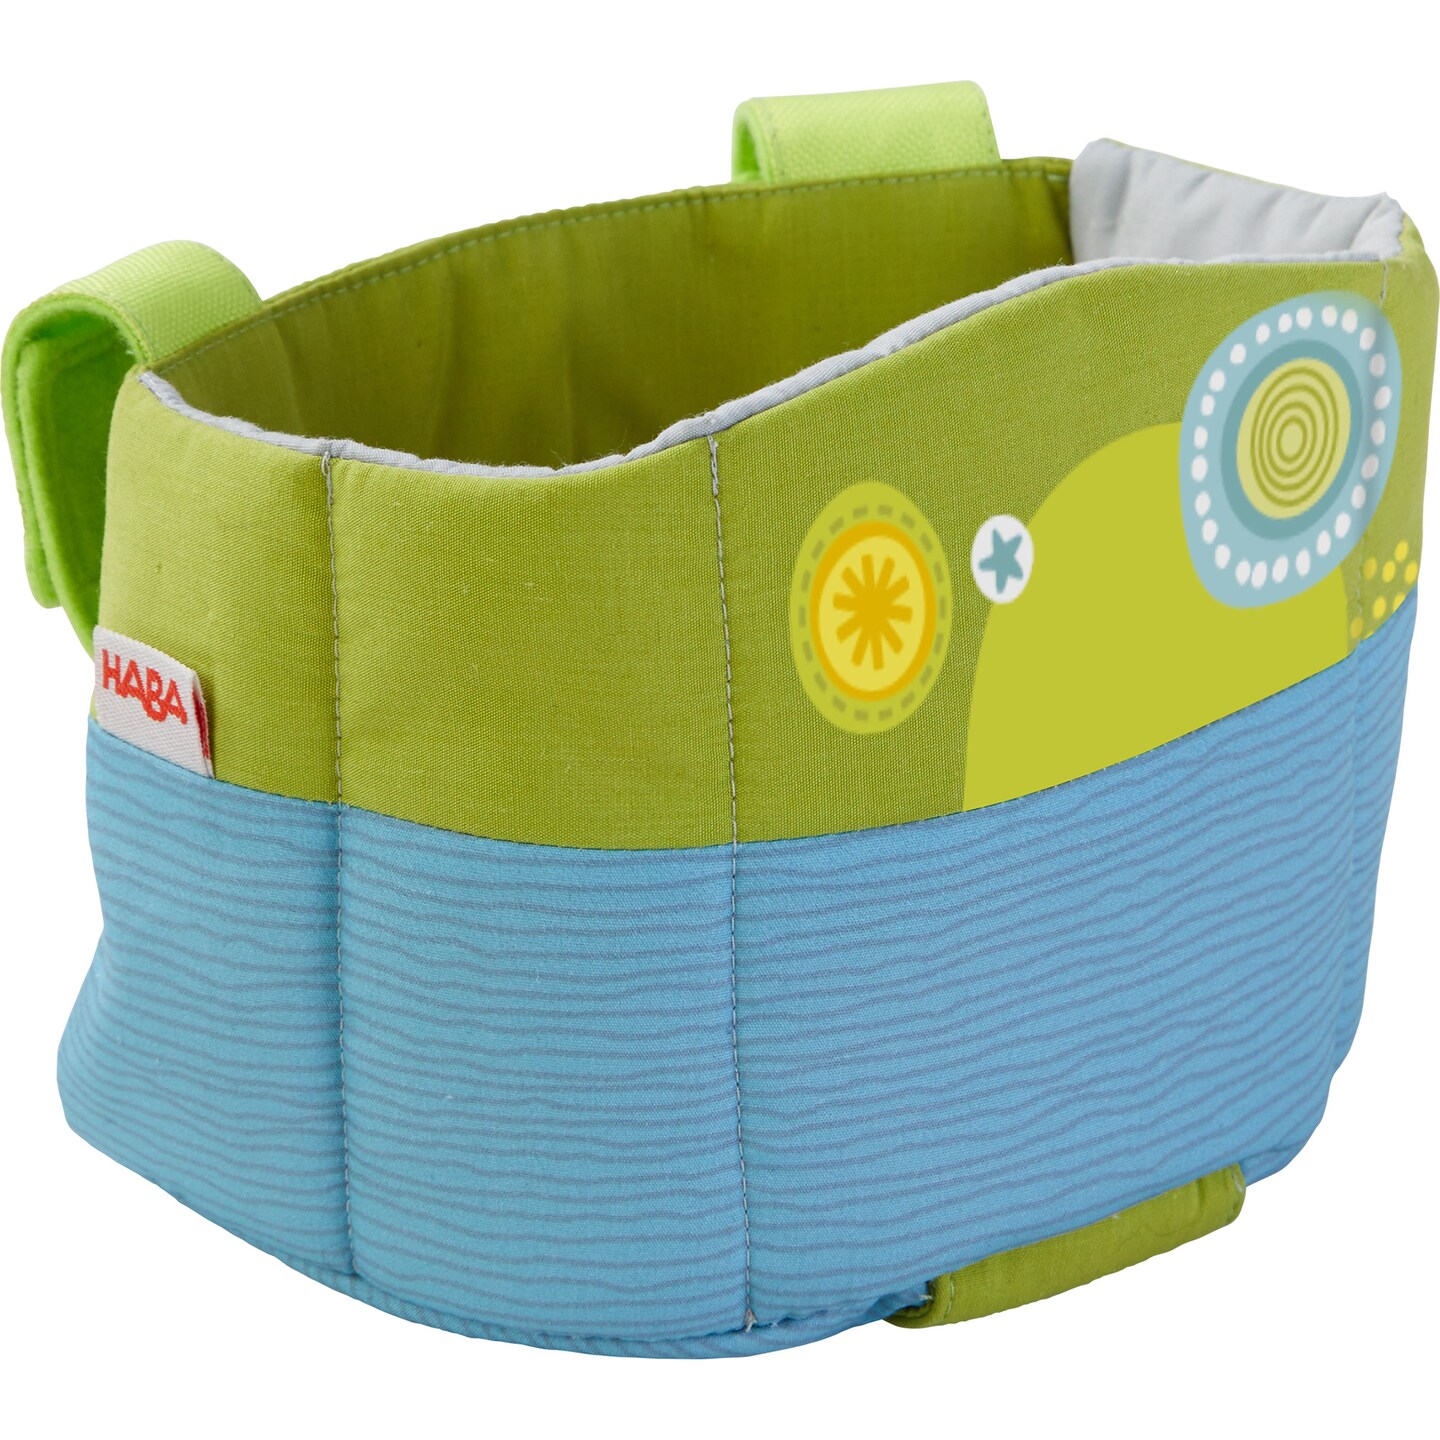 HABA Soft Doll&#x27;s Bike Seat Blue &#x26; Green - Attaches to Handlebars with Hook &#x26; Loop Attachment (Scooters Trikes &#x26; Bicycles)